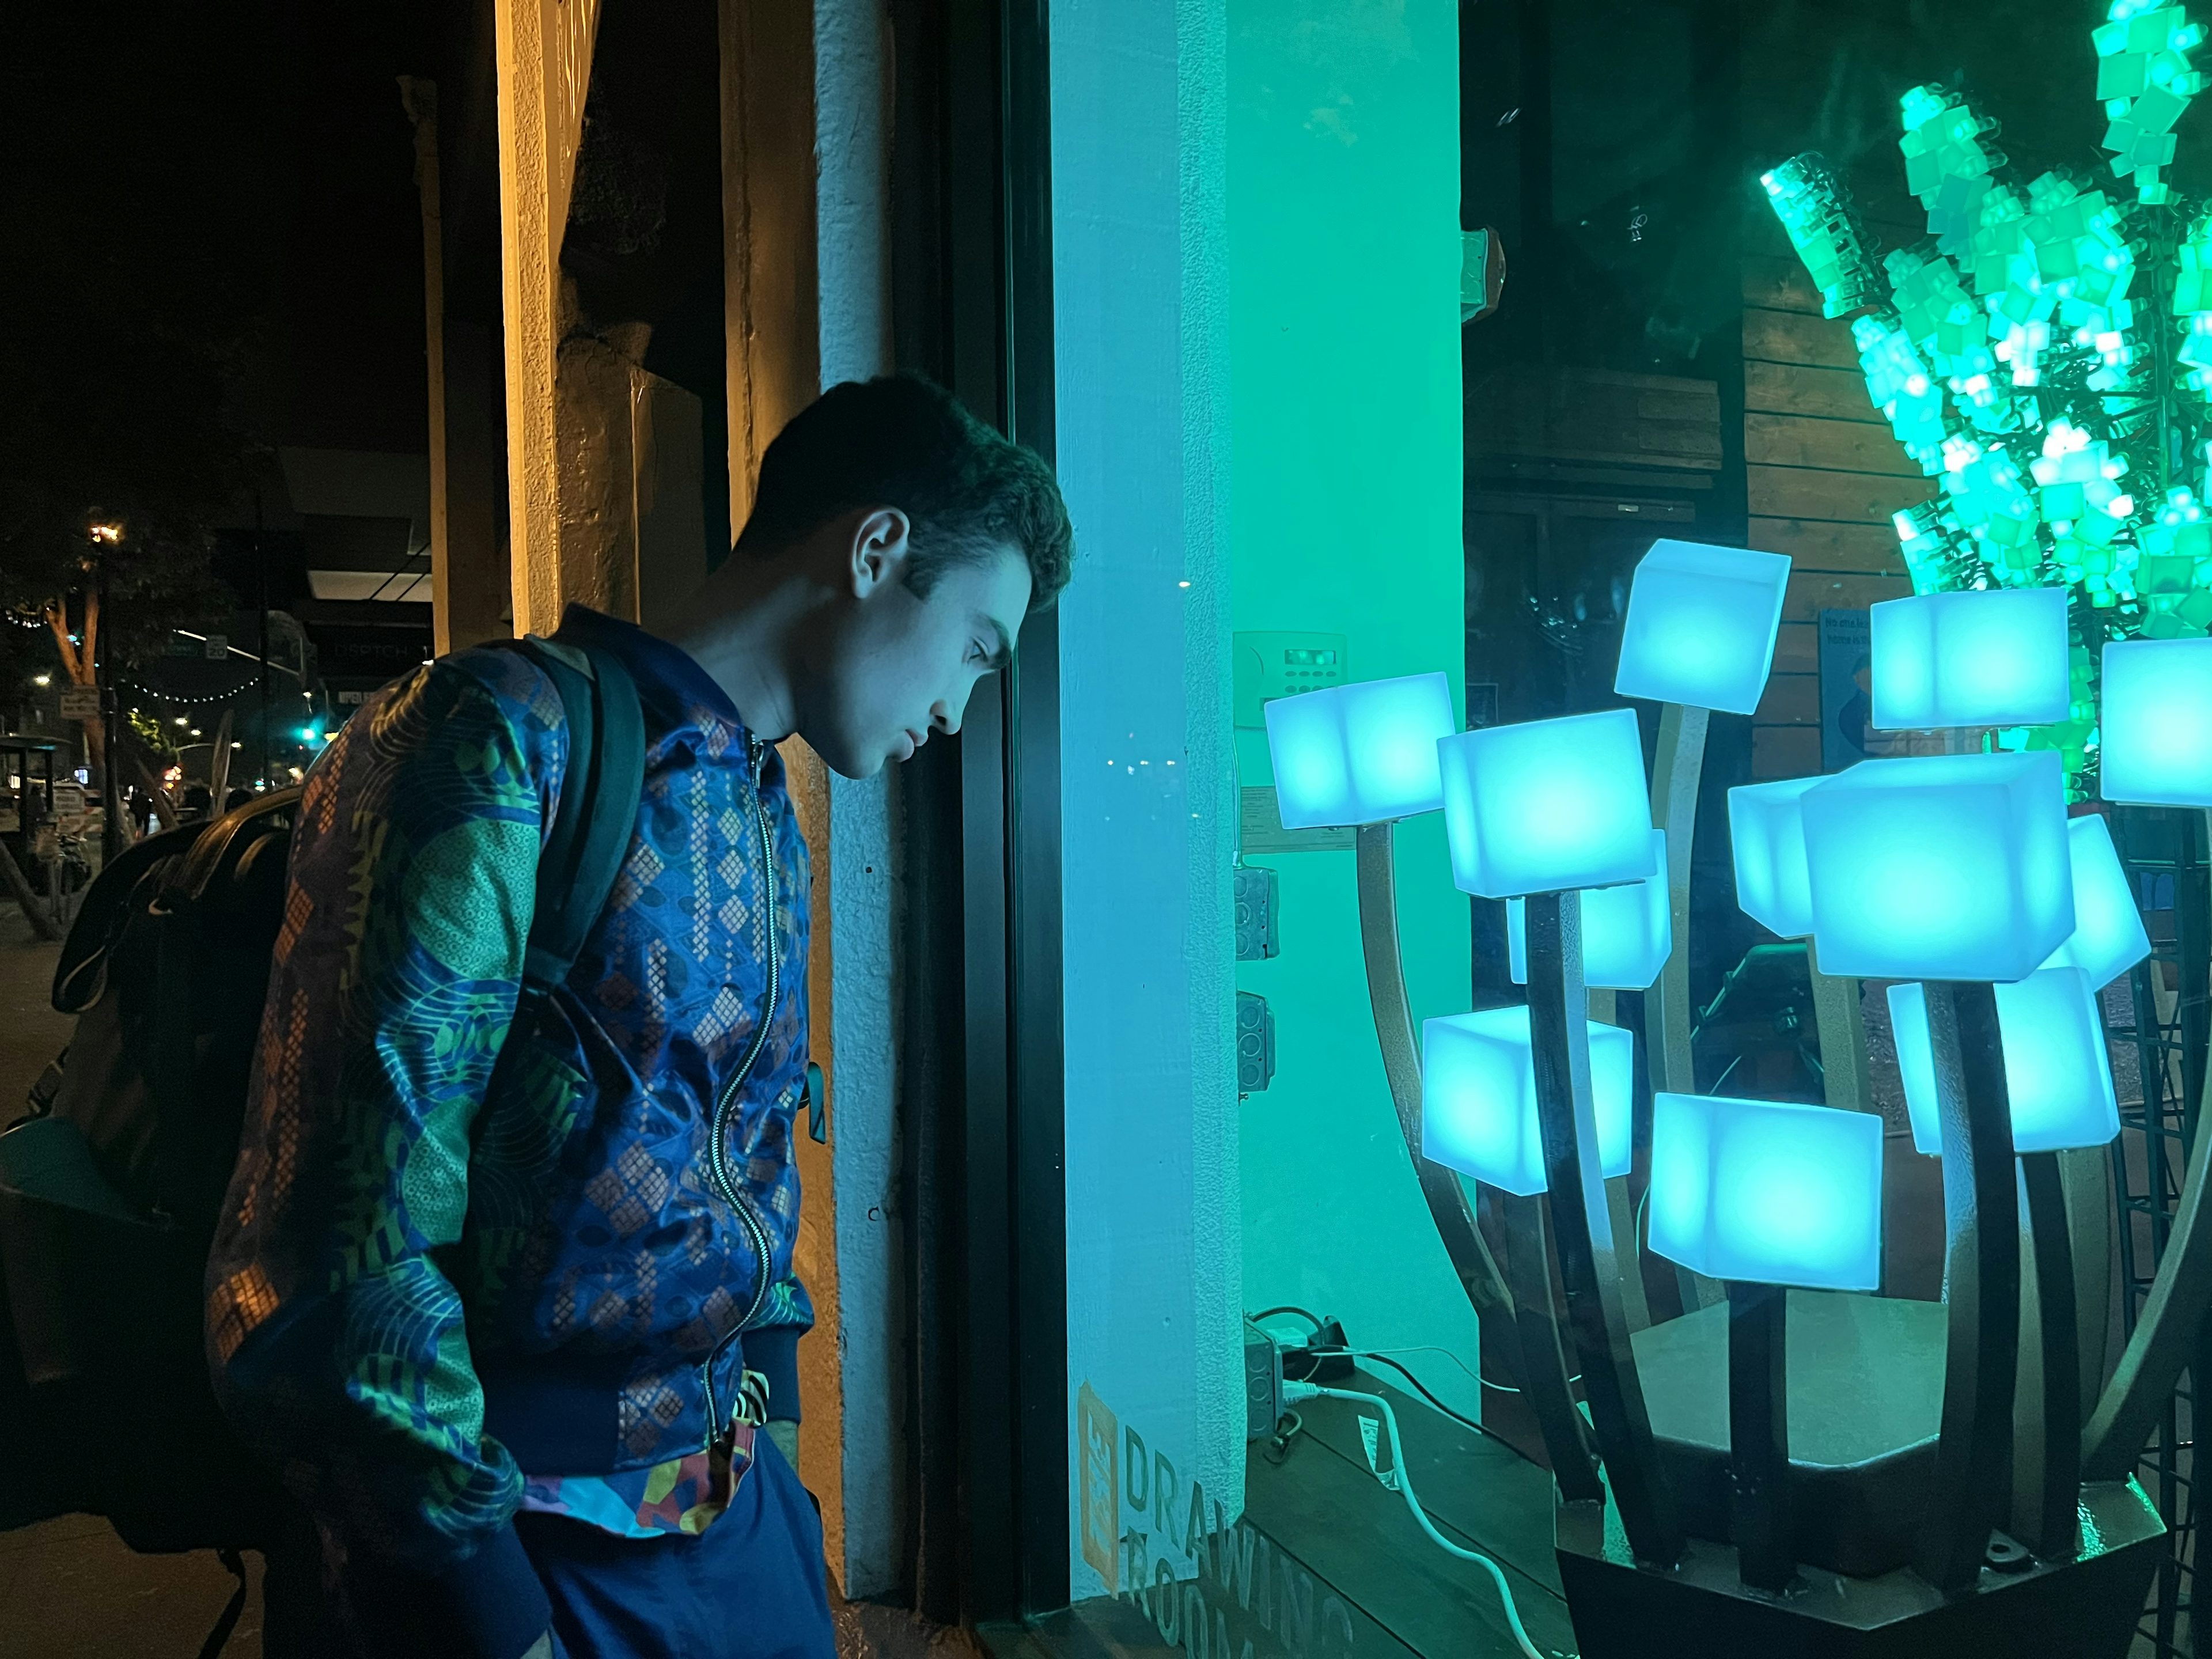 Lachlan wearing a reflective bomber jacket appearing moody looking at an art exhibit in a window with green lighting